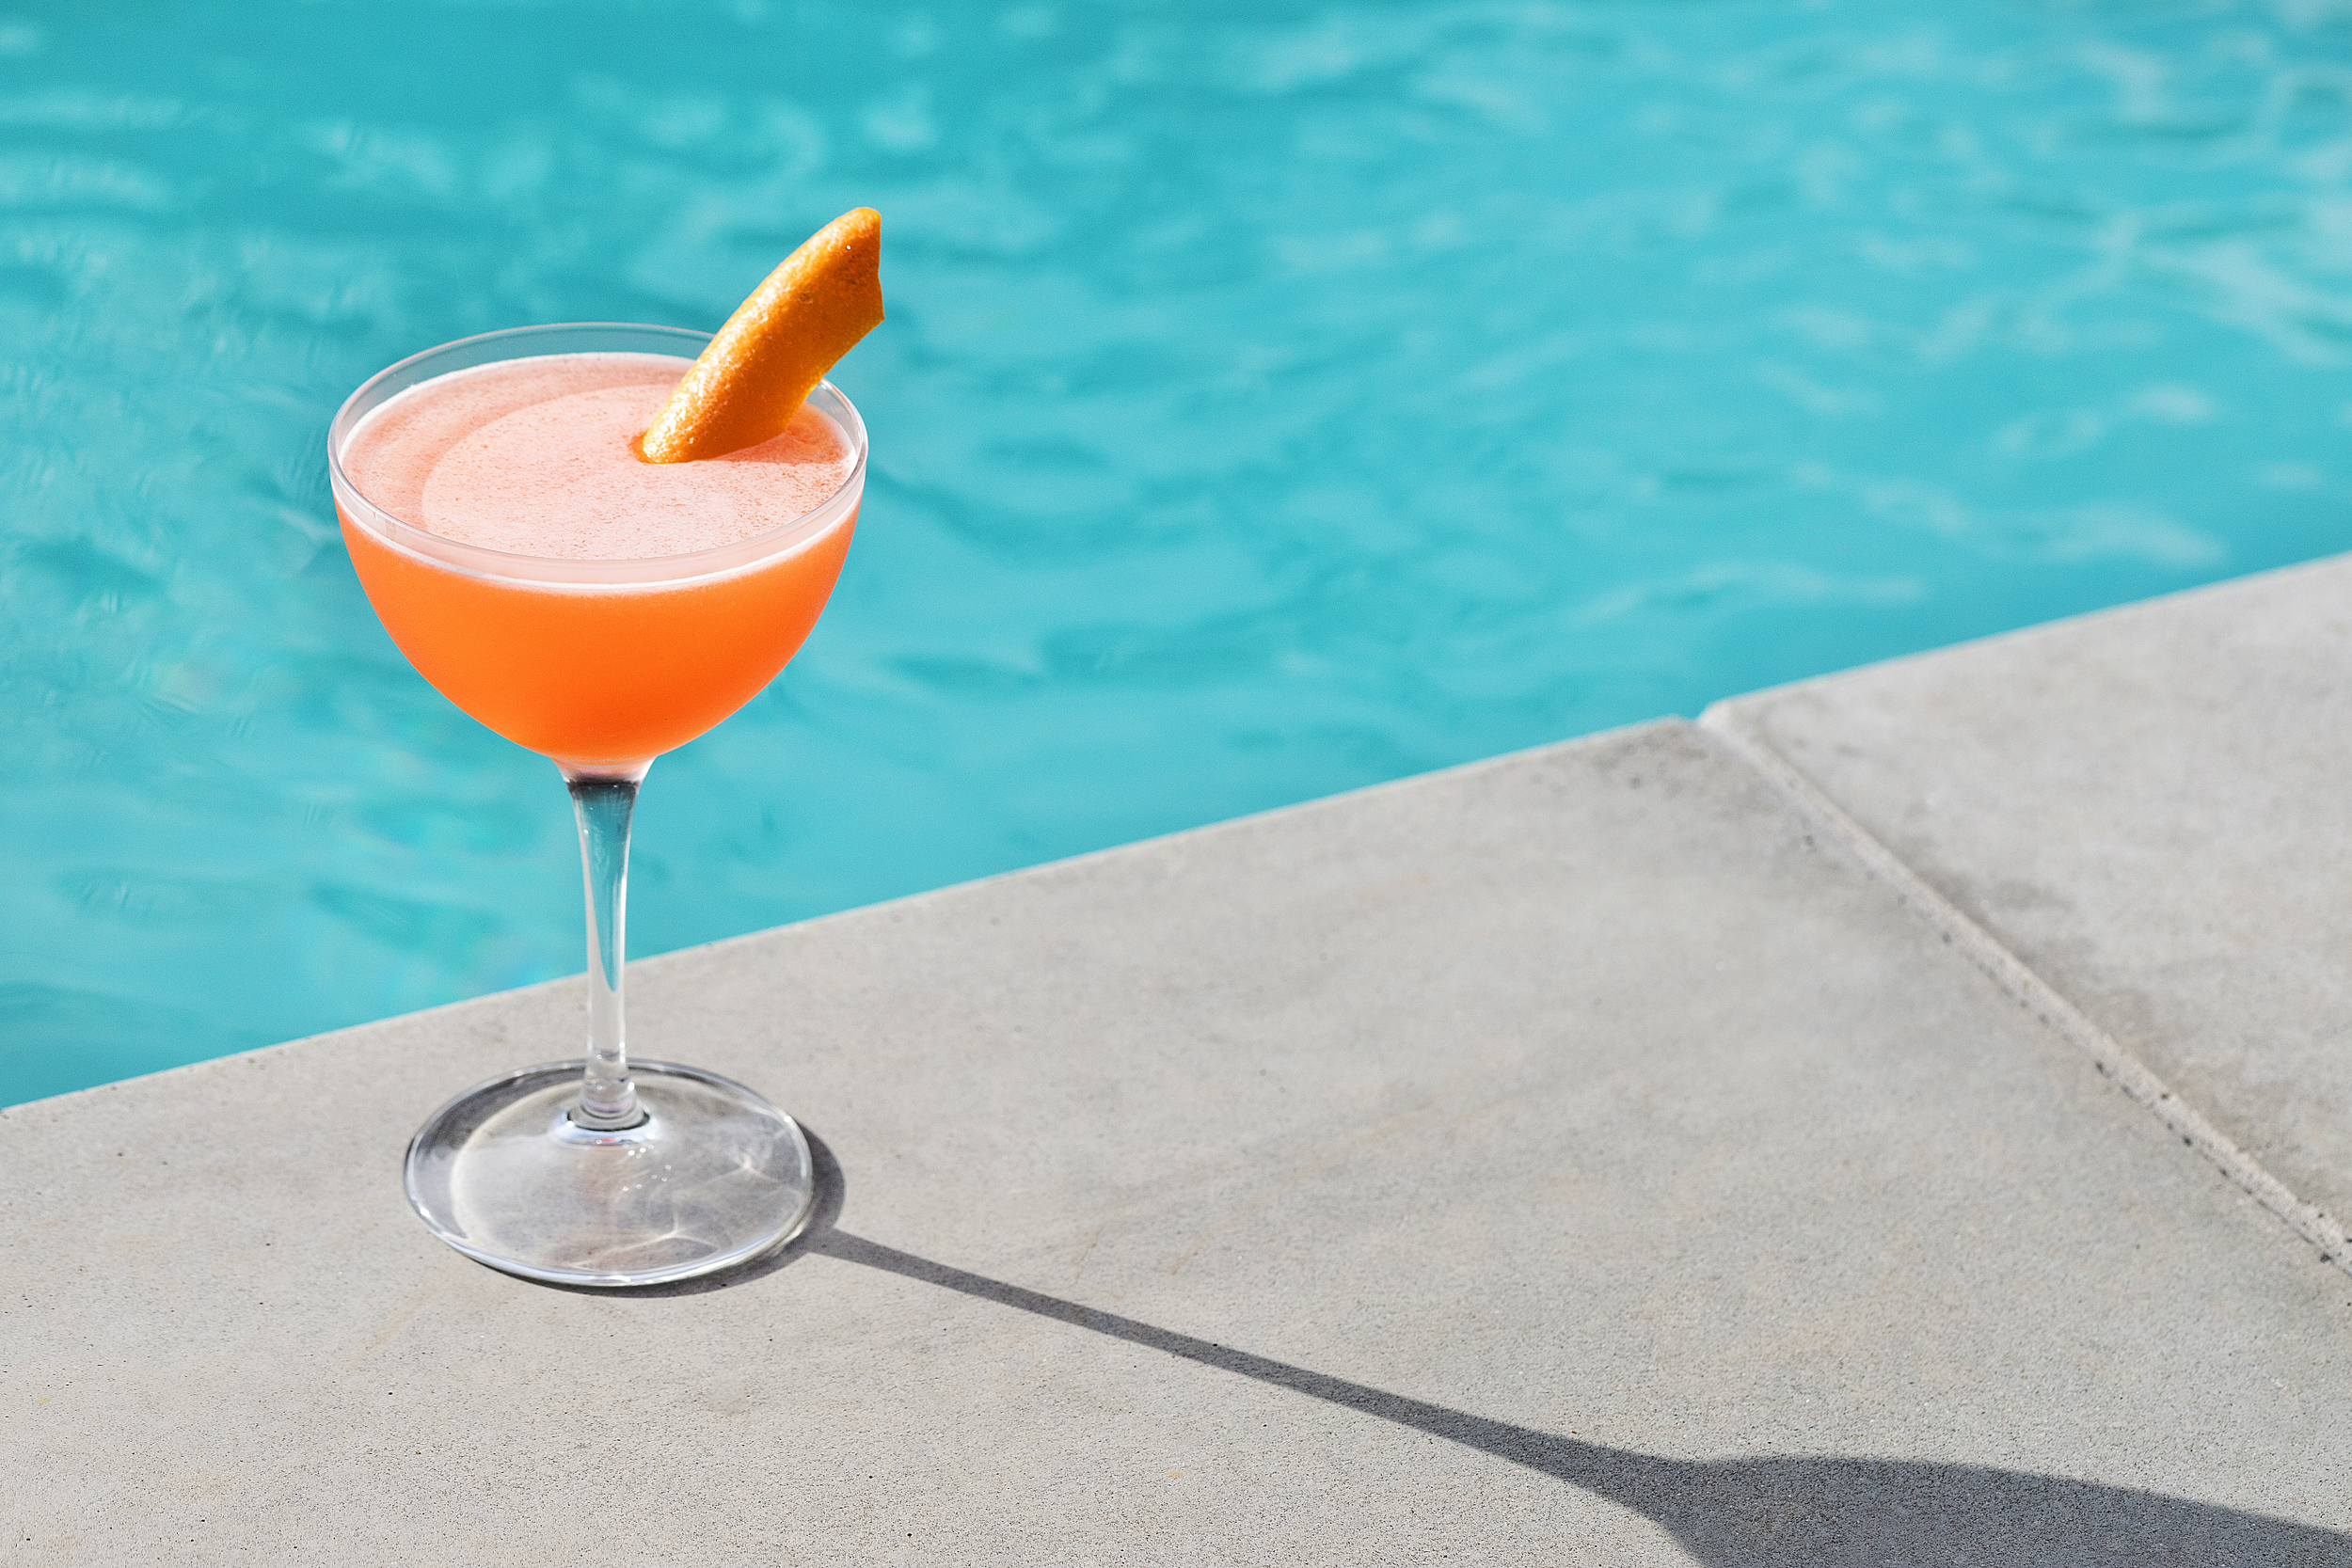 An orange cocktail in a tall glass sits next to a shimmering pool.